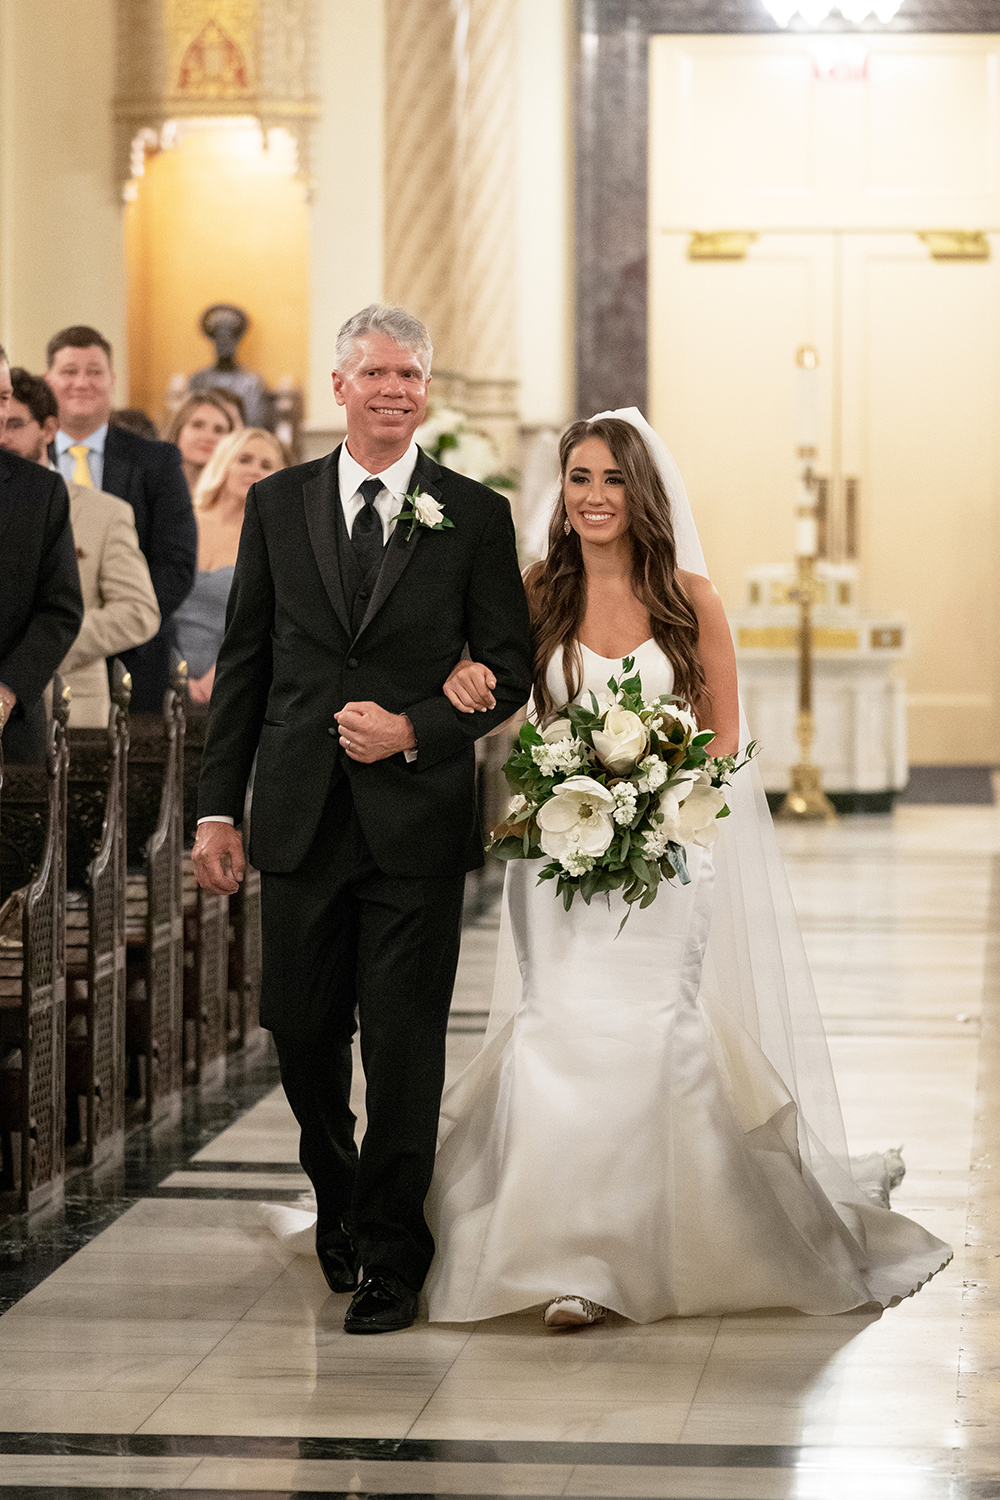 Amanda and her father walk down the aisle